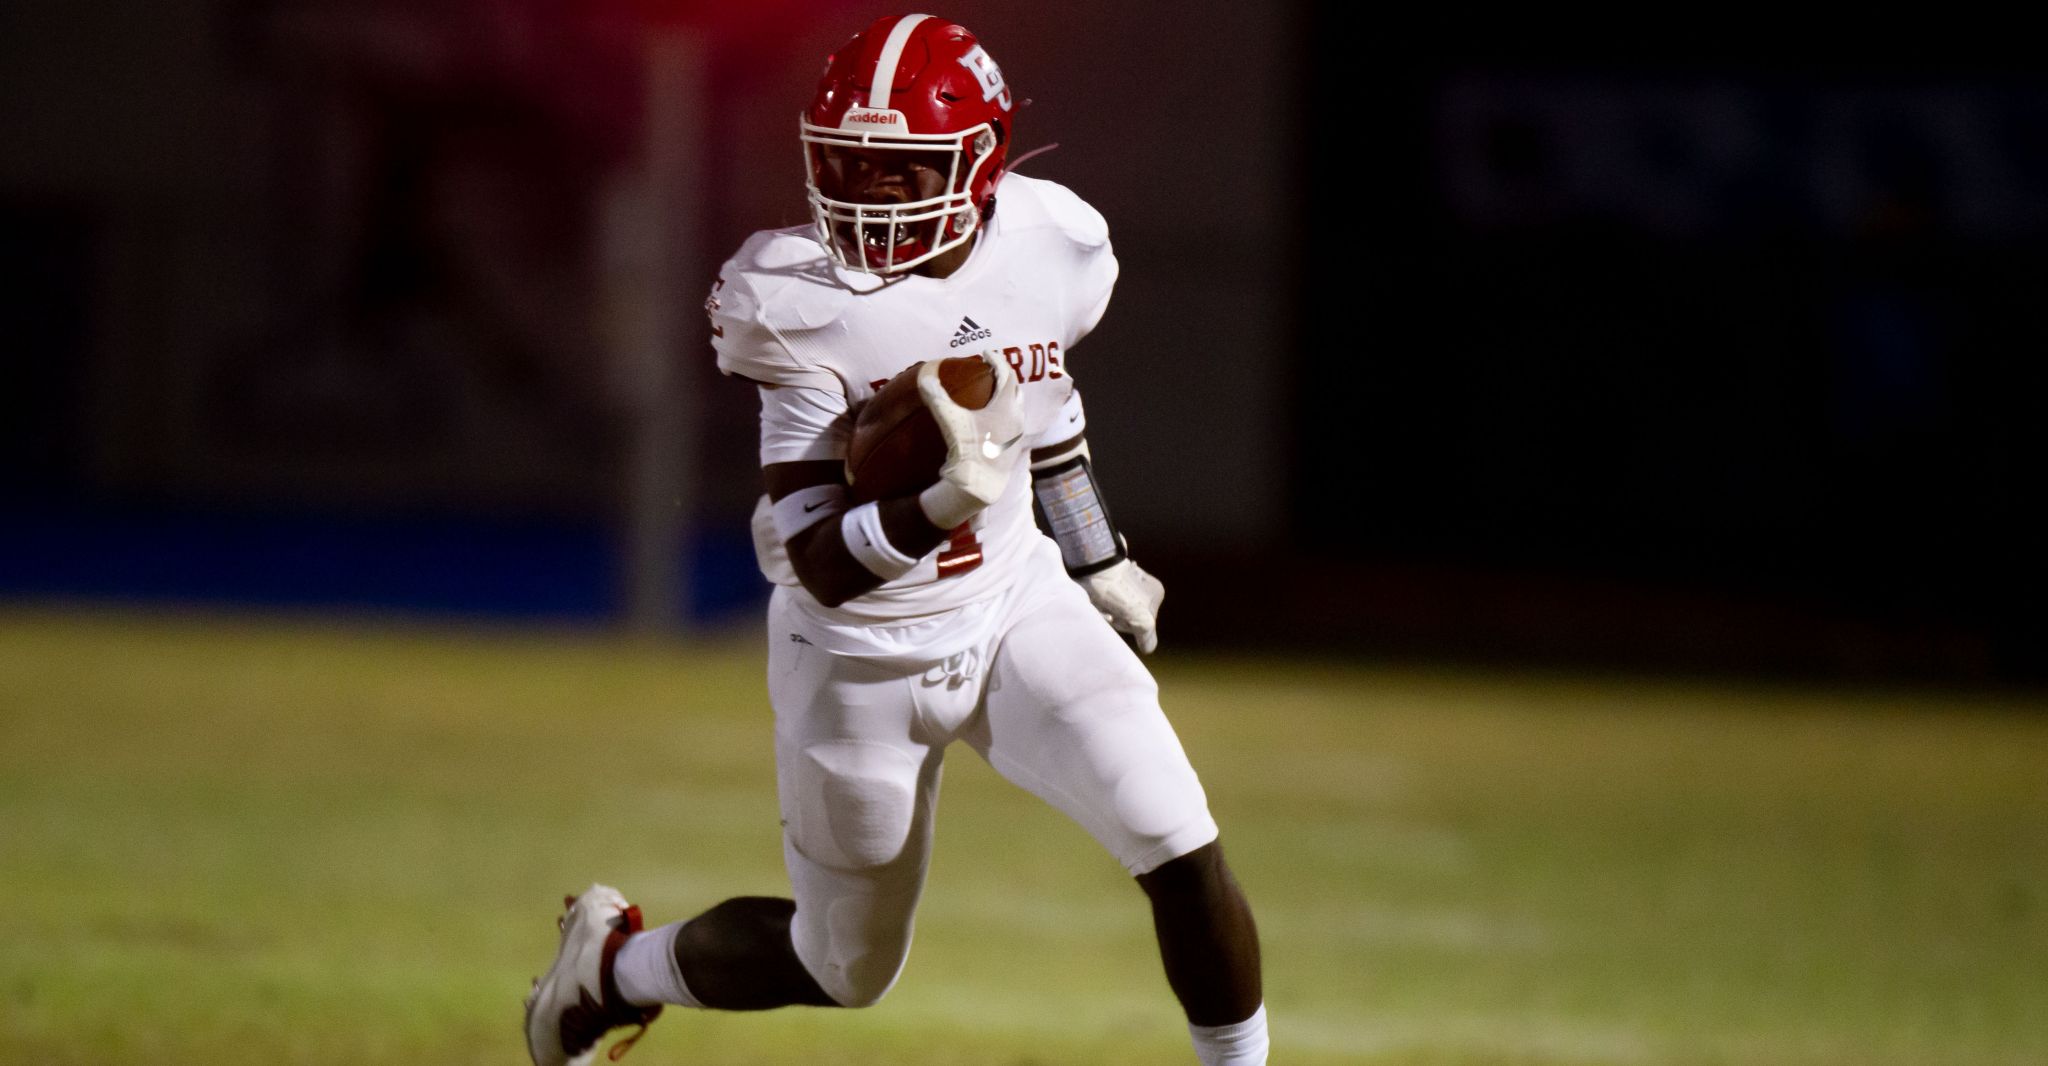 Rueben Owens ll on X: Just been updated to the #1 RB composite